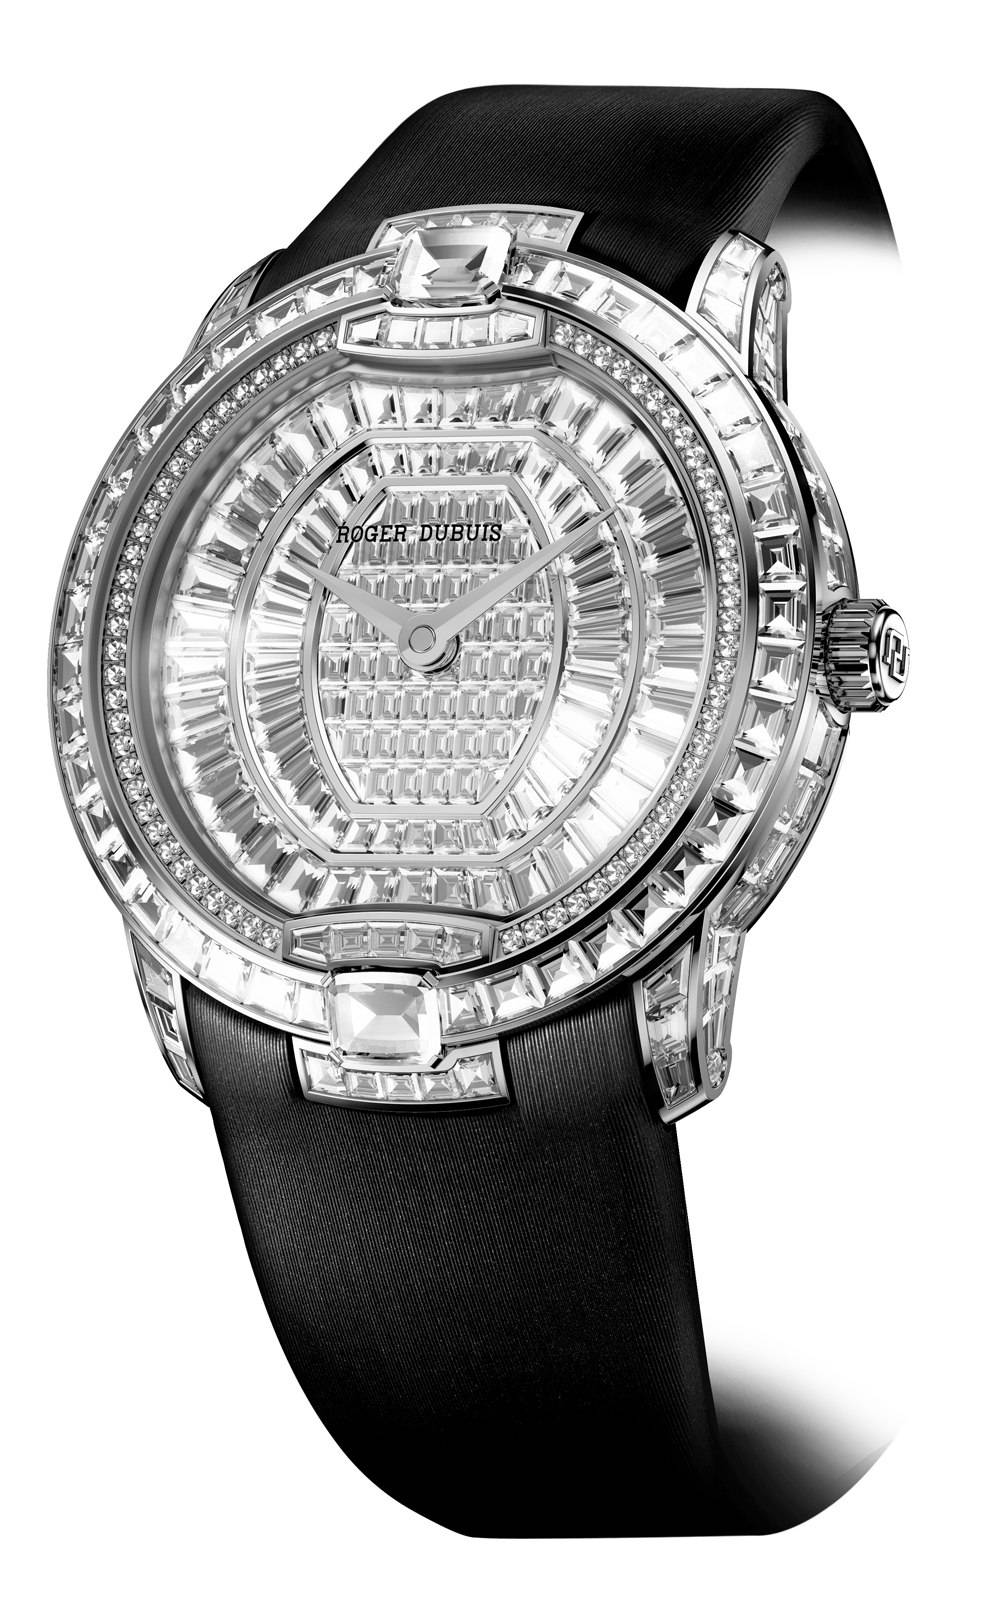 Haute Watch of the Week: Roger Dubuis High Jewelry Velvet